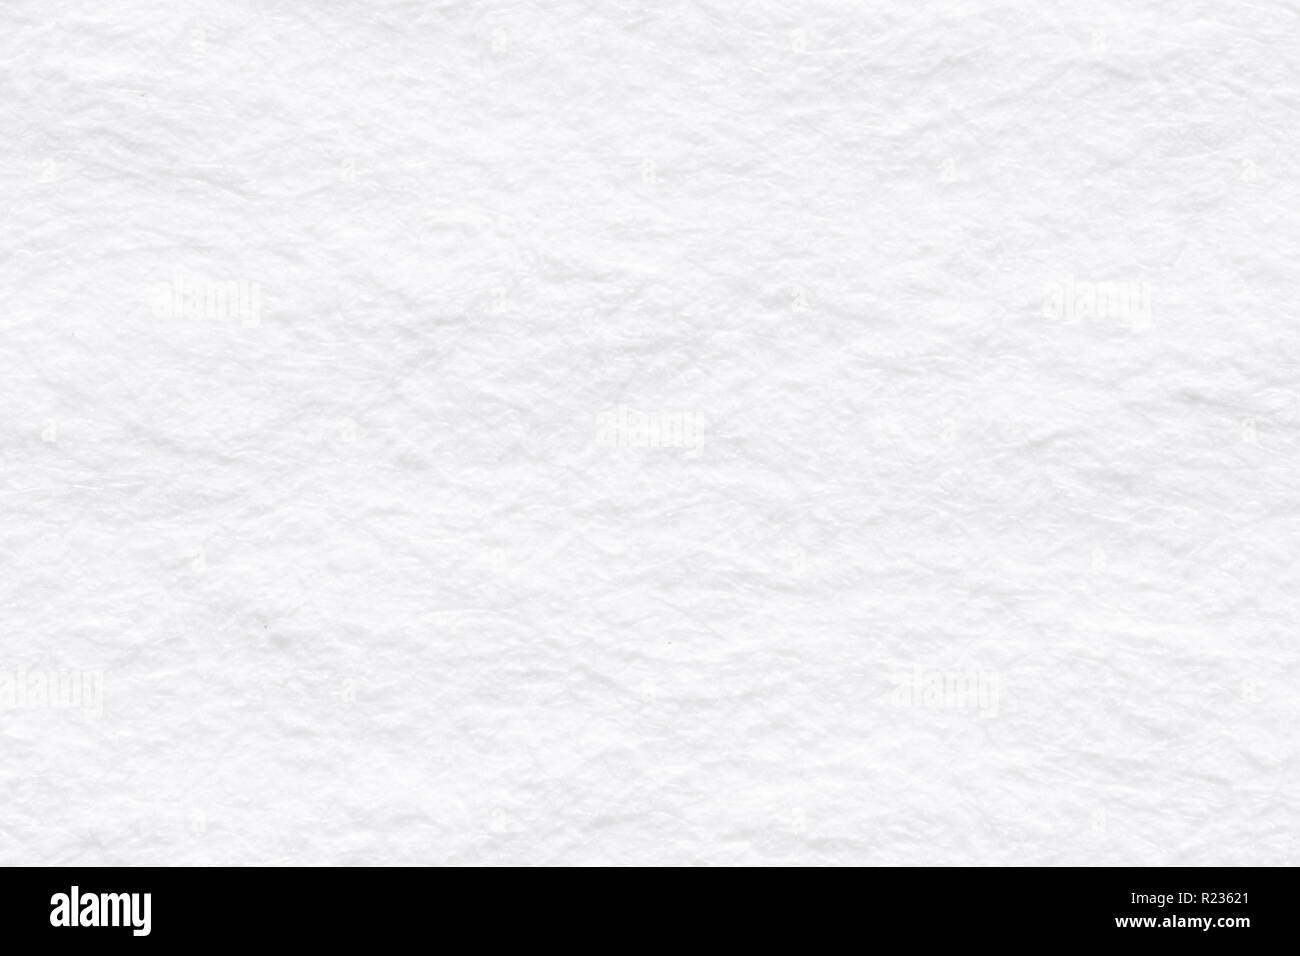 Awesome white texture for your new design. Stock Photo